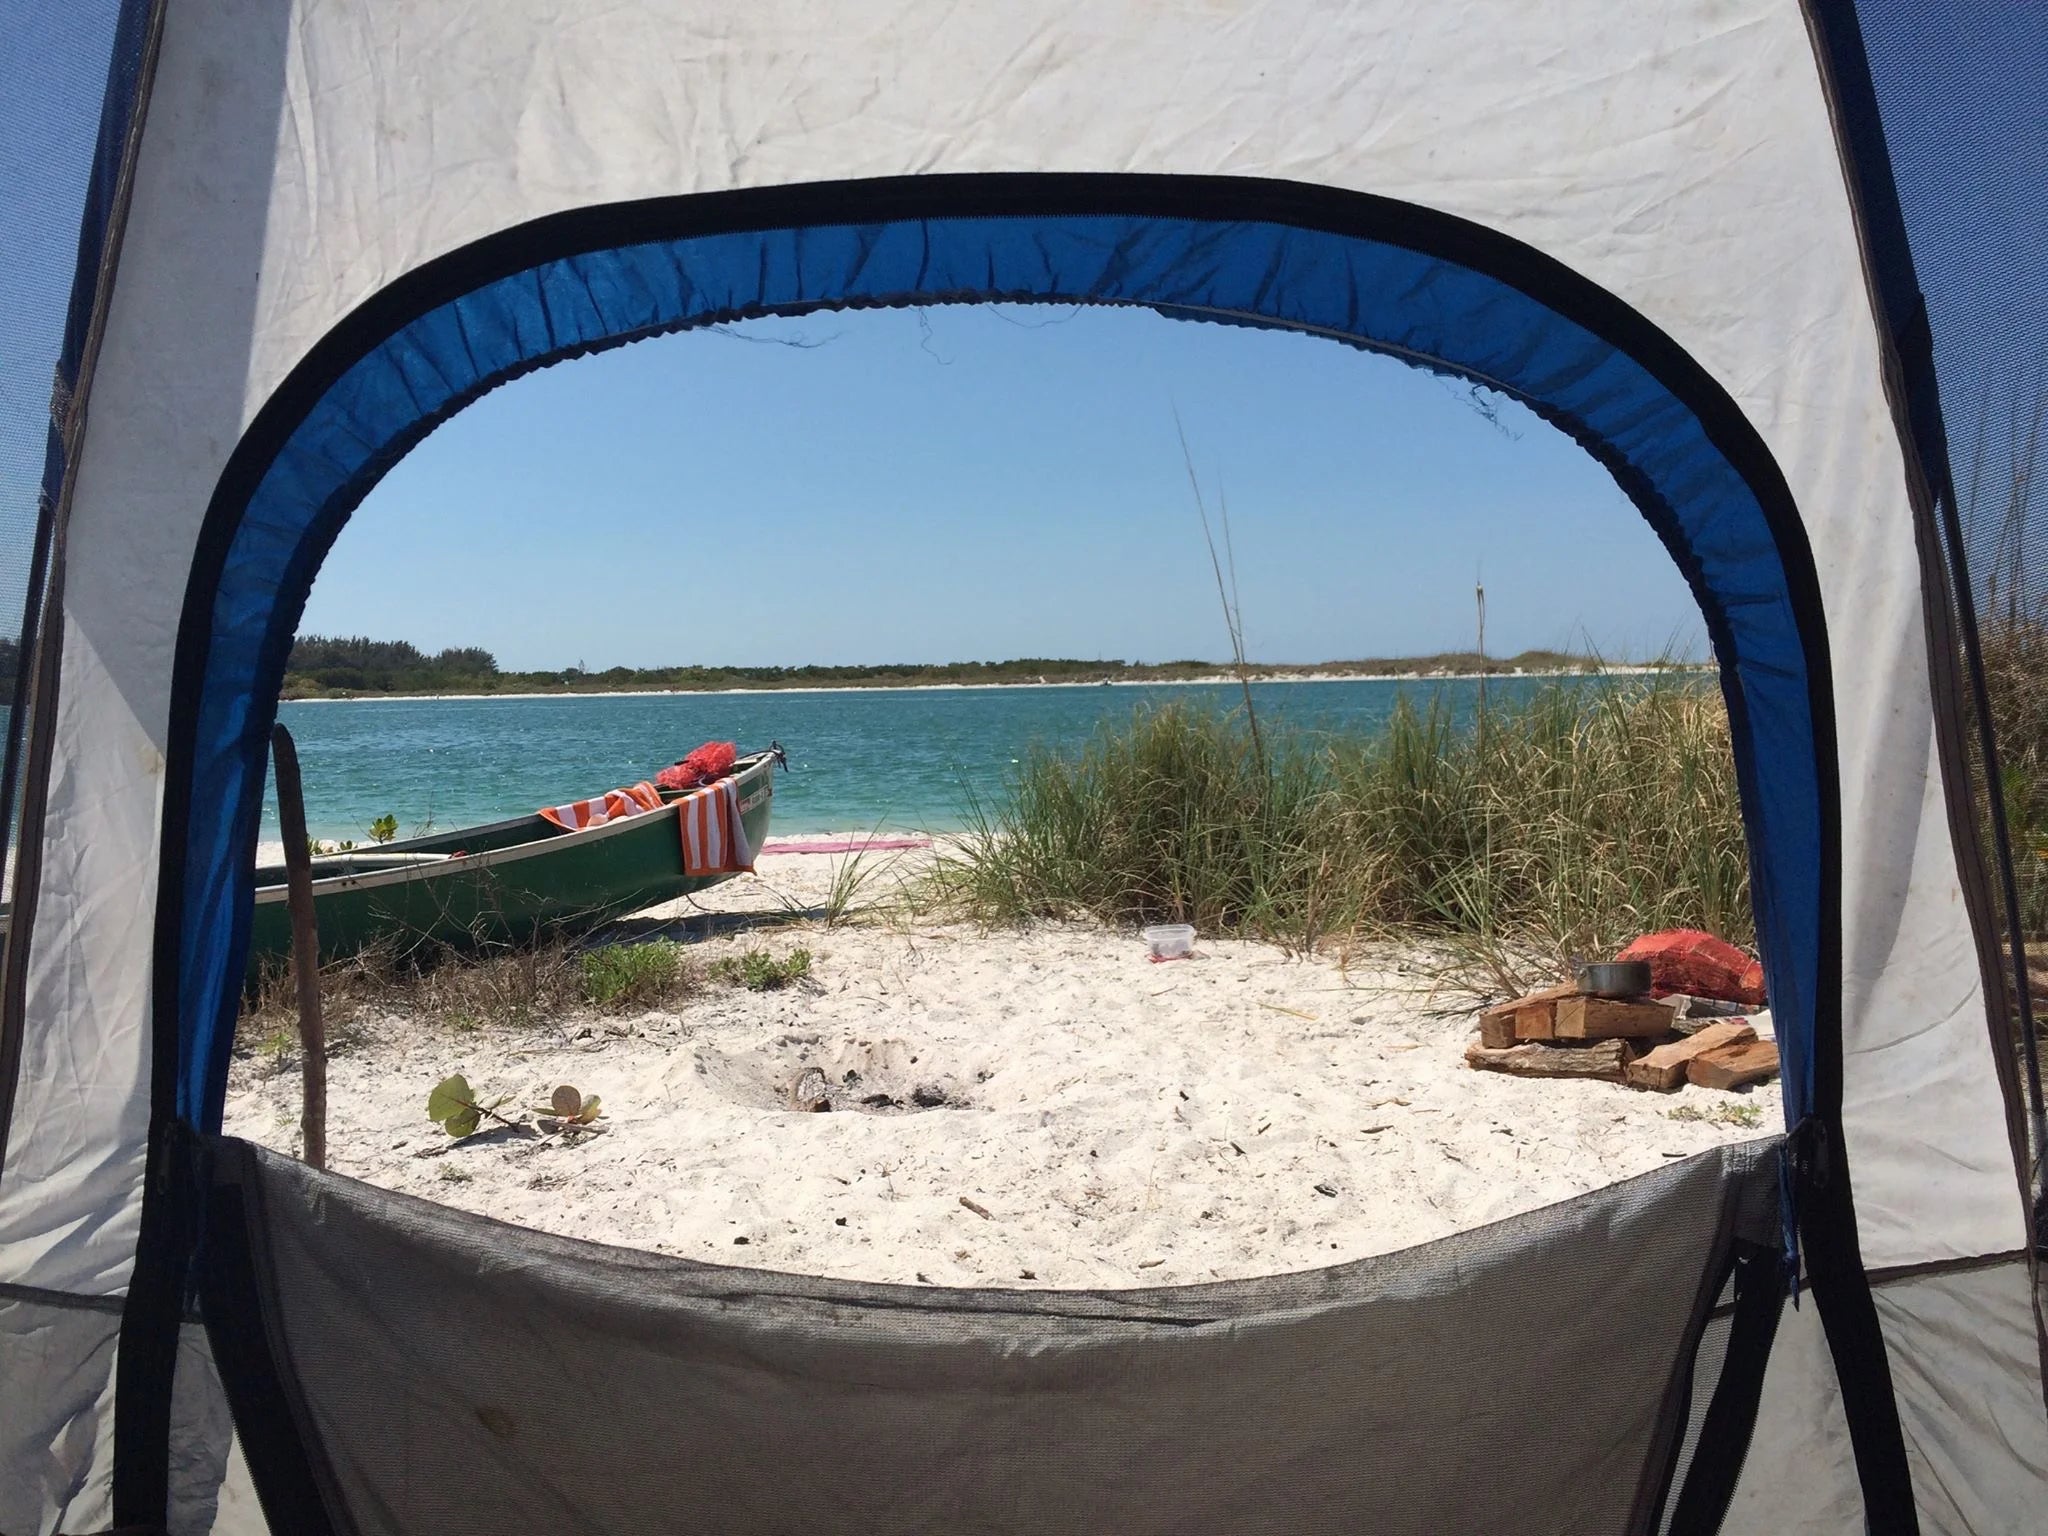 View of a white sand beach and ocean from inside a tent